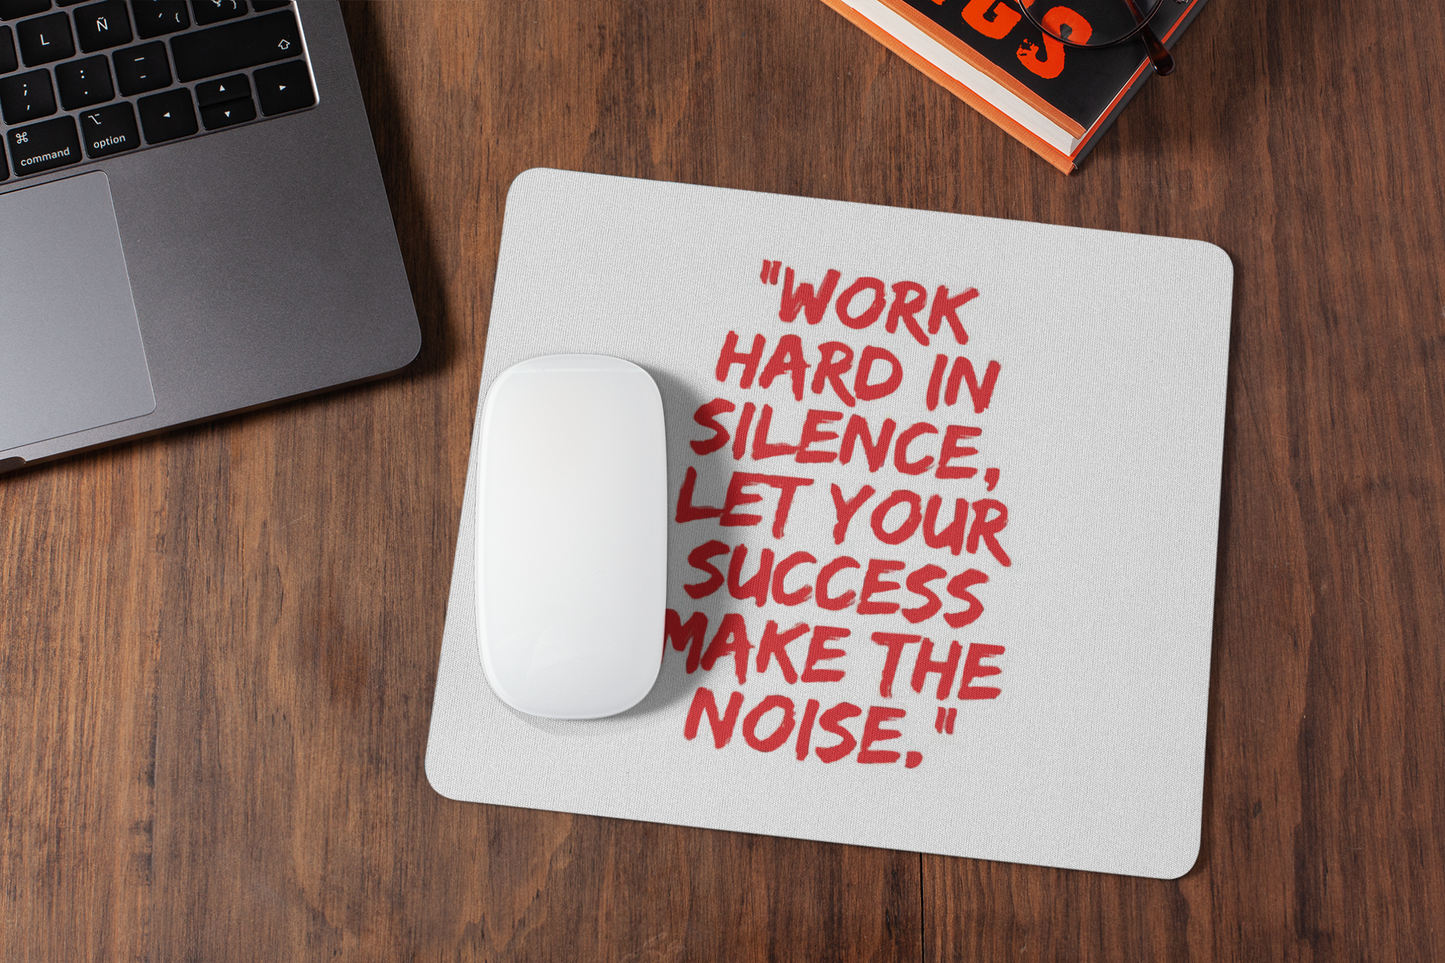 Work hard in silence let your success mousepad for laptop and desktop with Rubber Base - Anti Skid